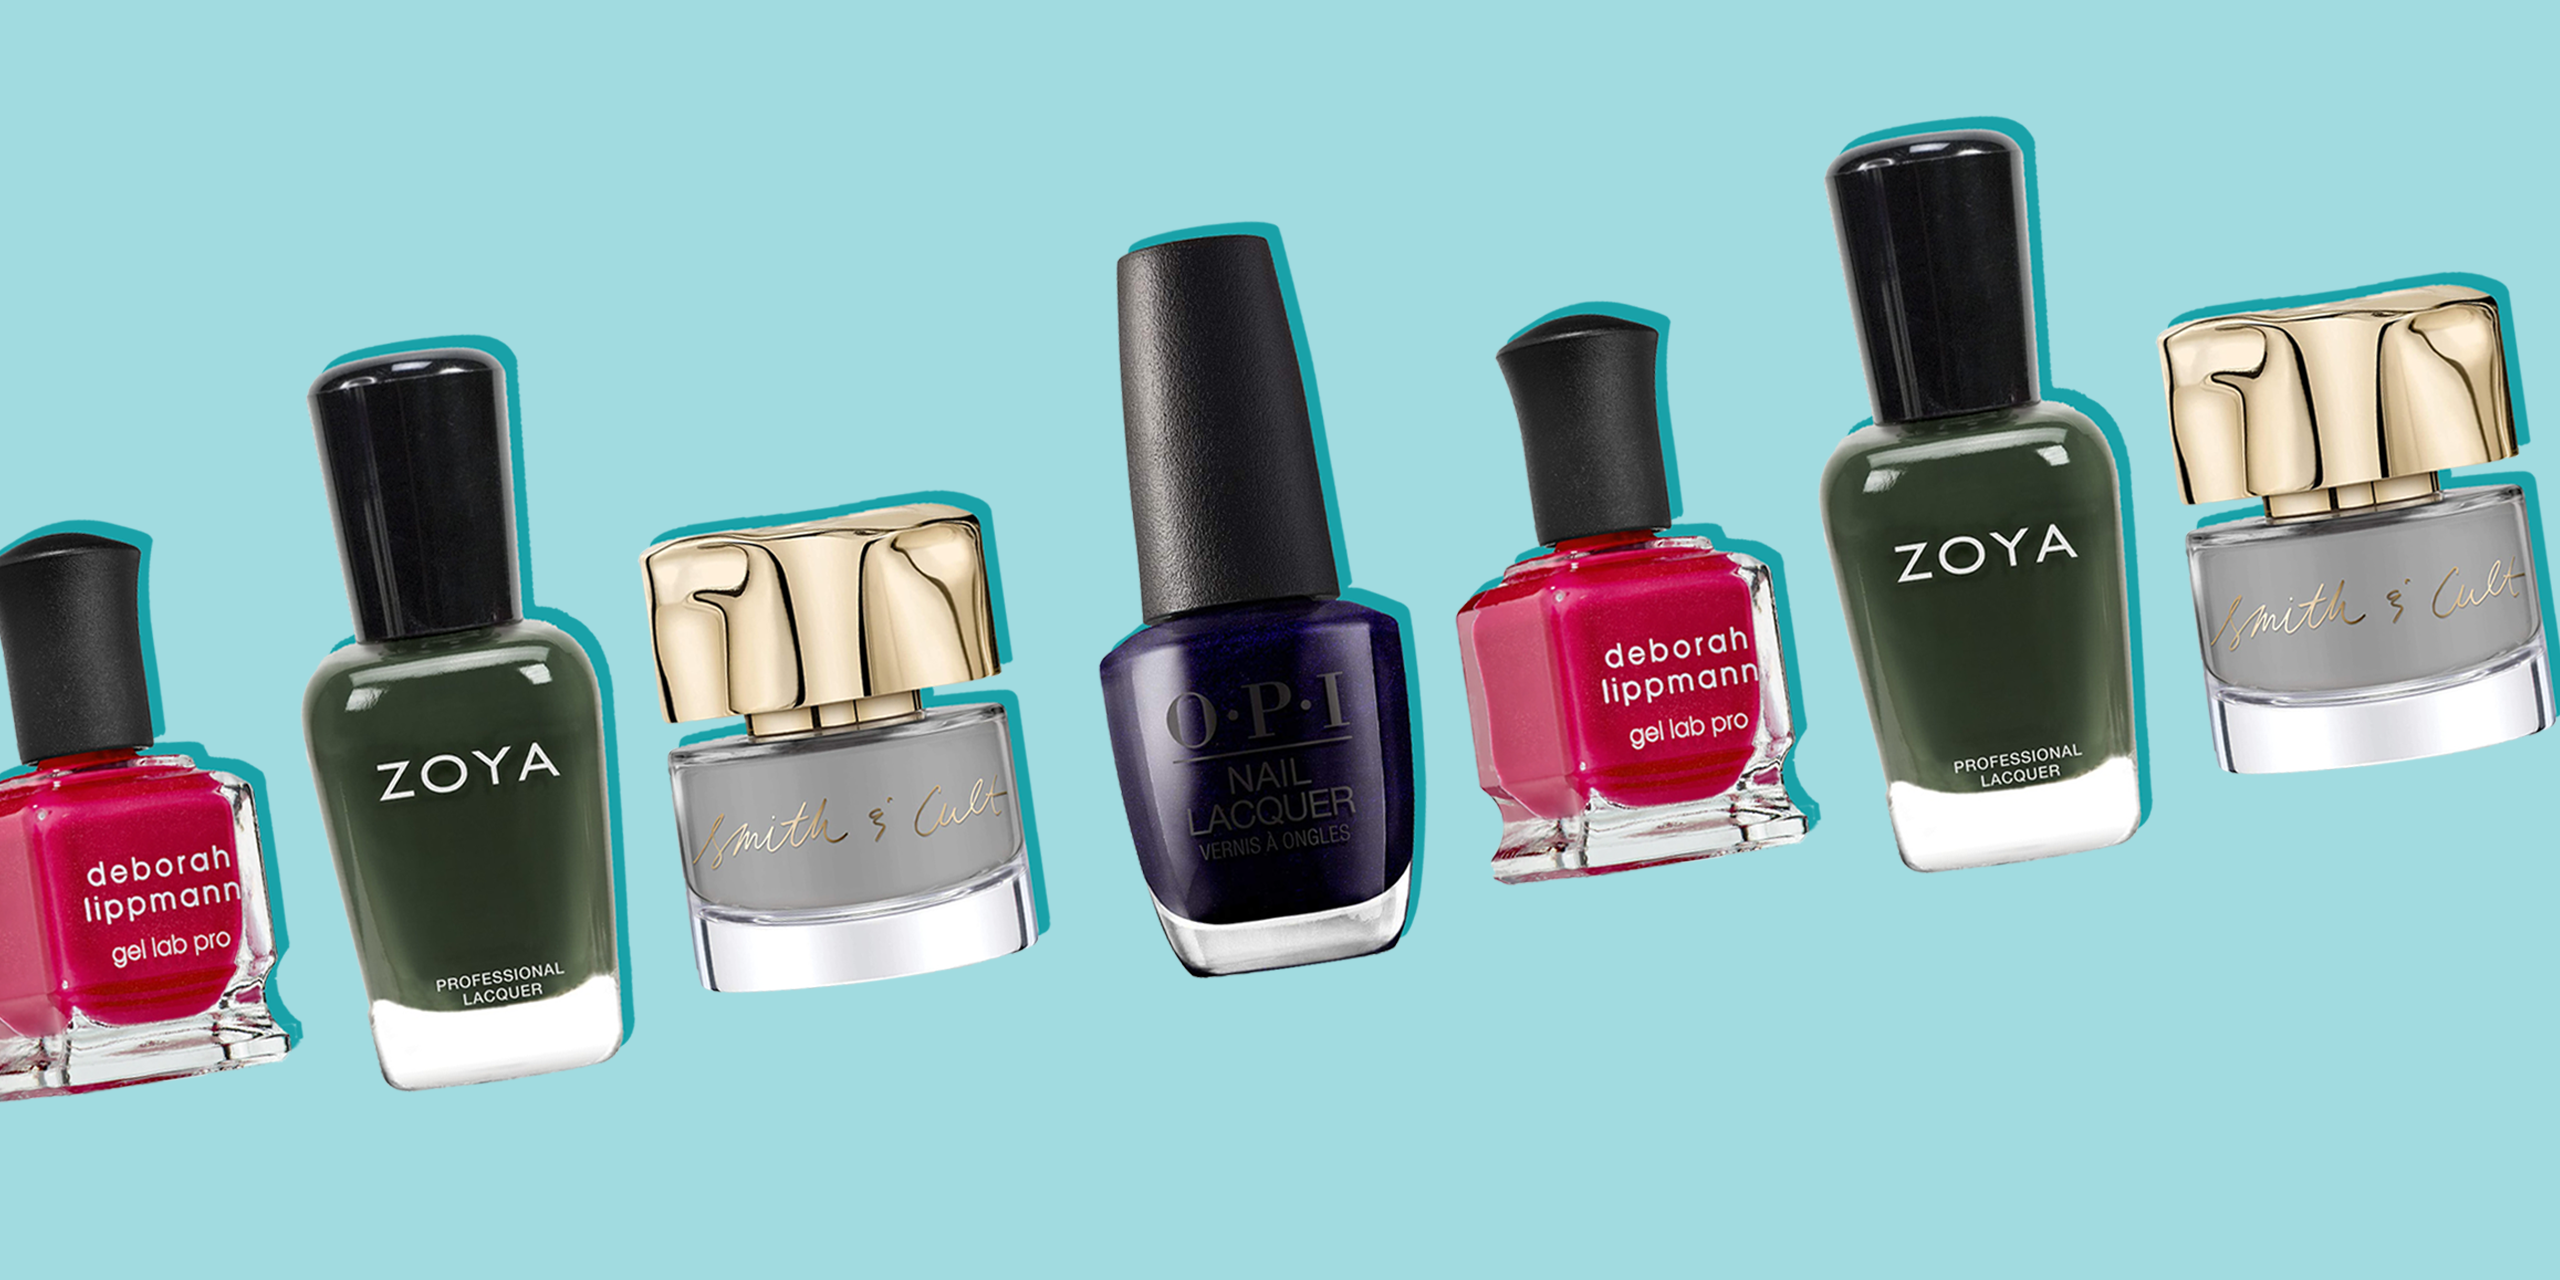 The Best Nail Polish Colors — Lots of Lacquer